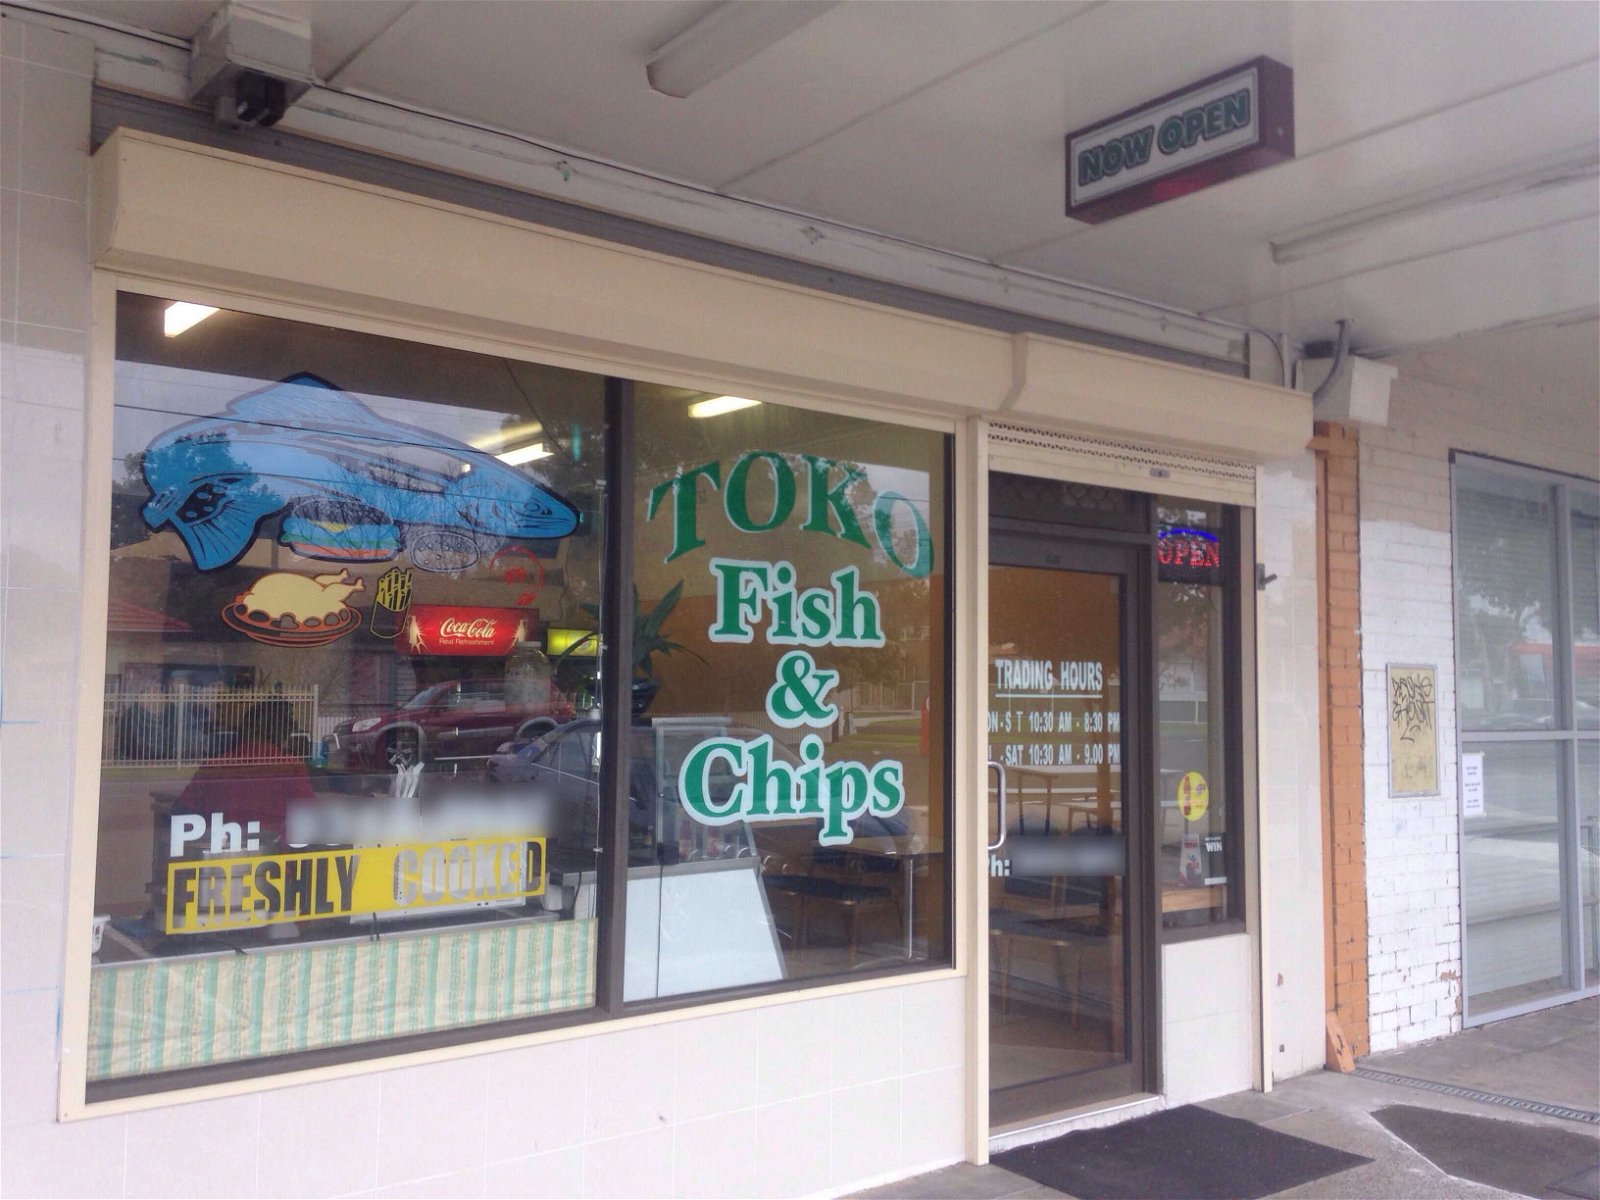 Toko Fish & Chips - Accommodation Find 0